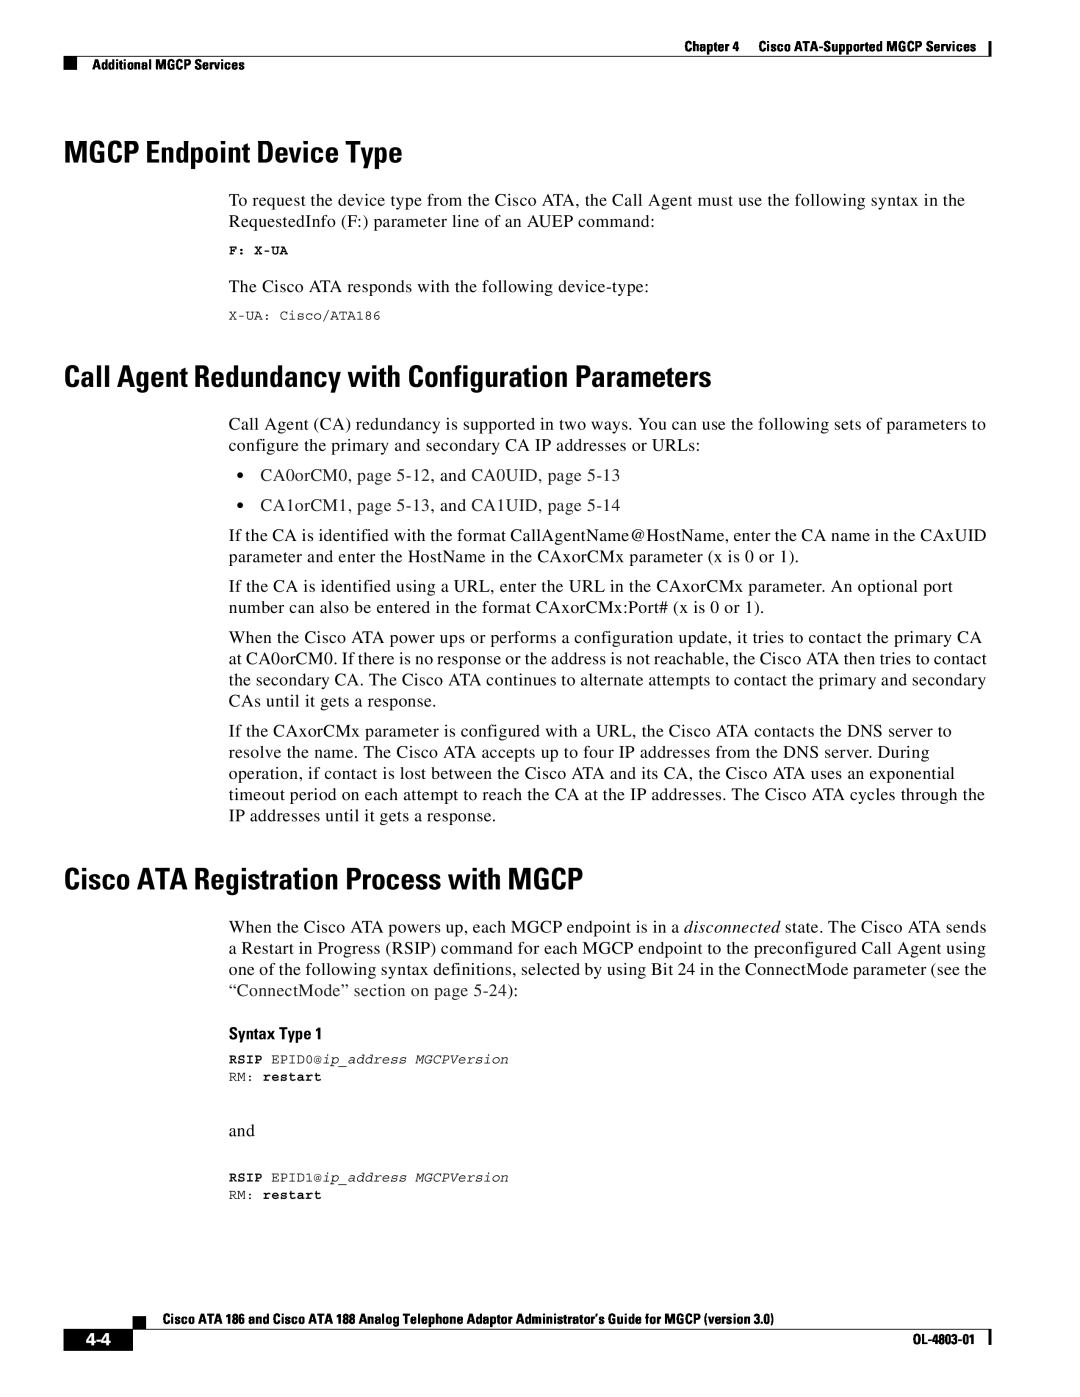 Cisco Systems ATA 186 manual MGCP Endpoint Device Type, Call Agent Redundancy with Configuration Parameters, Syntax Type 